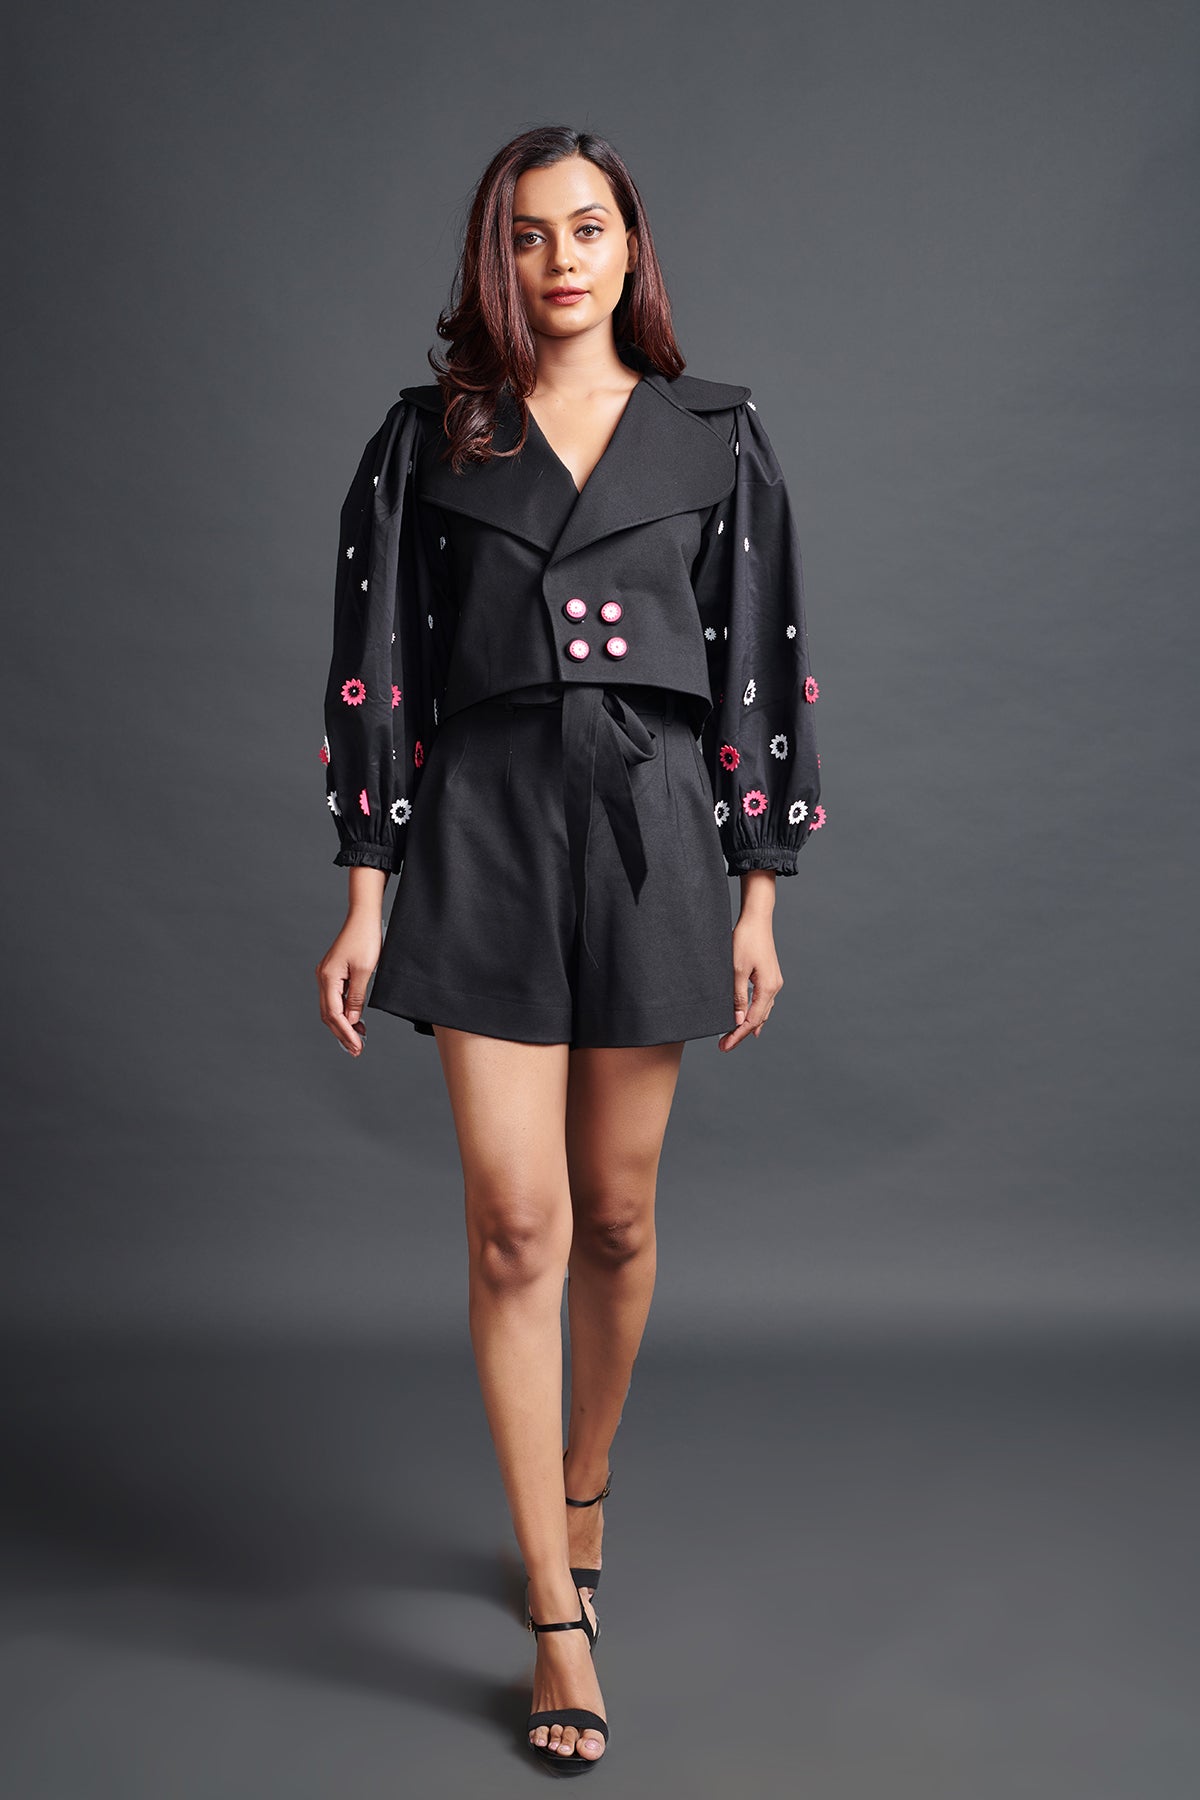 Image of BLACK CUT WORK DETAILED SLEEVED OVERLAP CROP JACKET AND SHORTS. From savoirfashions.com